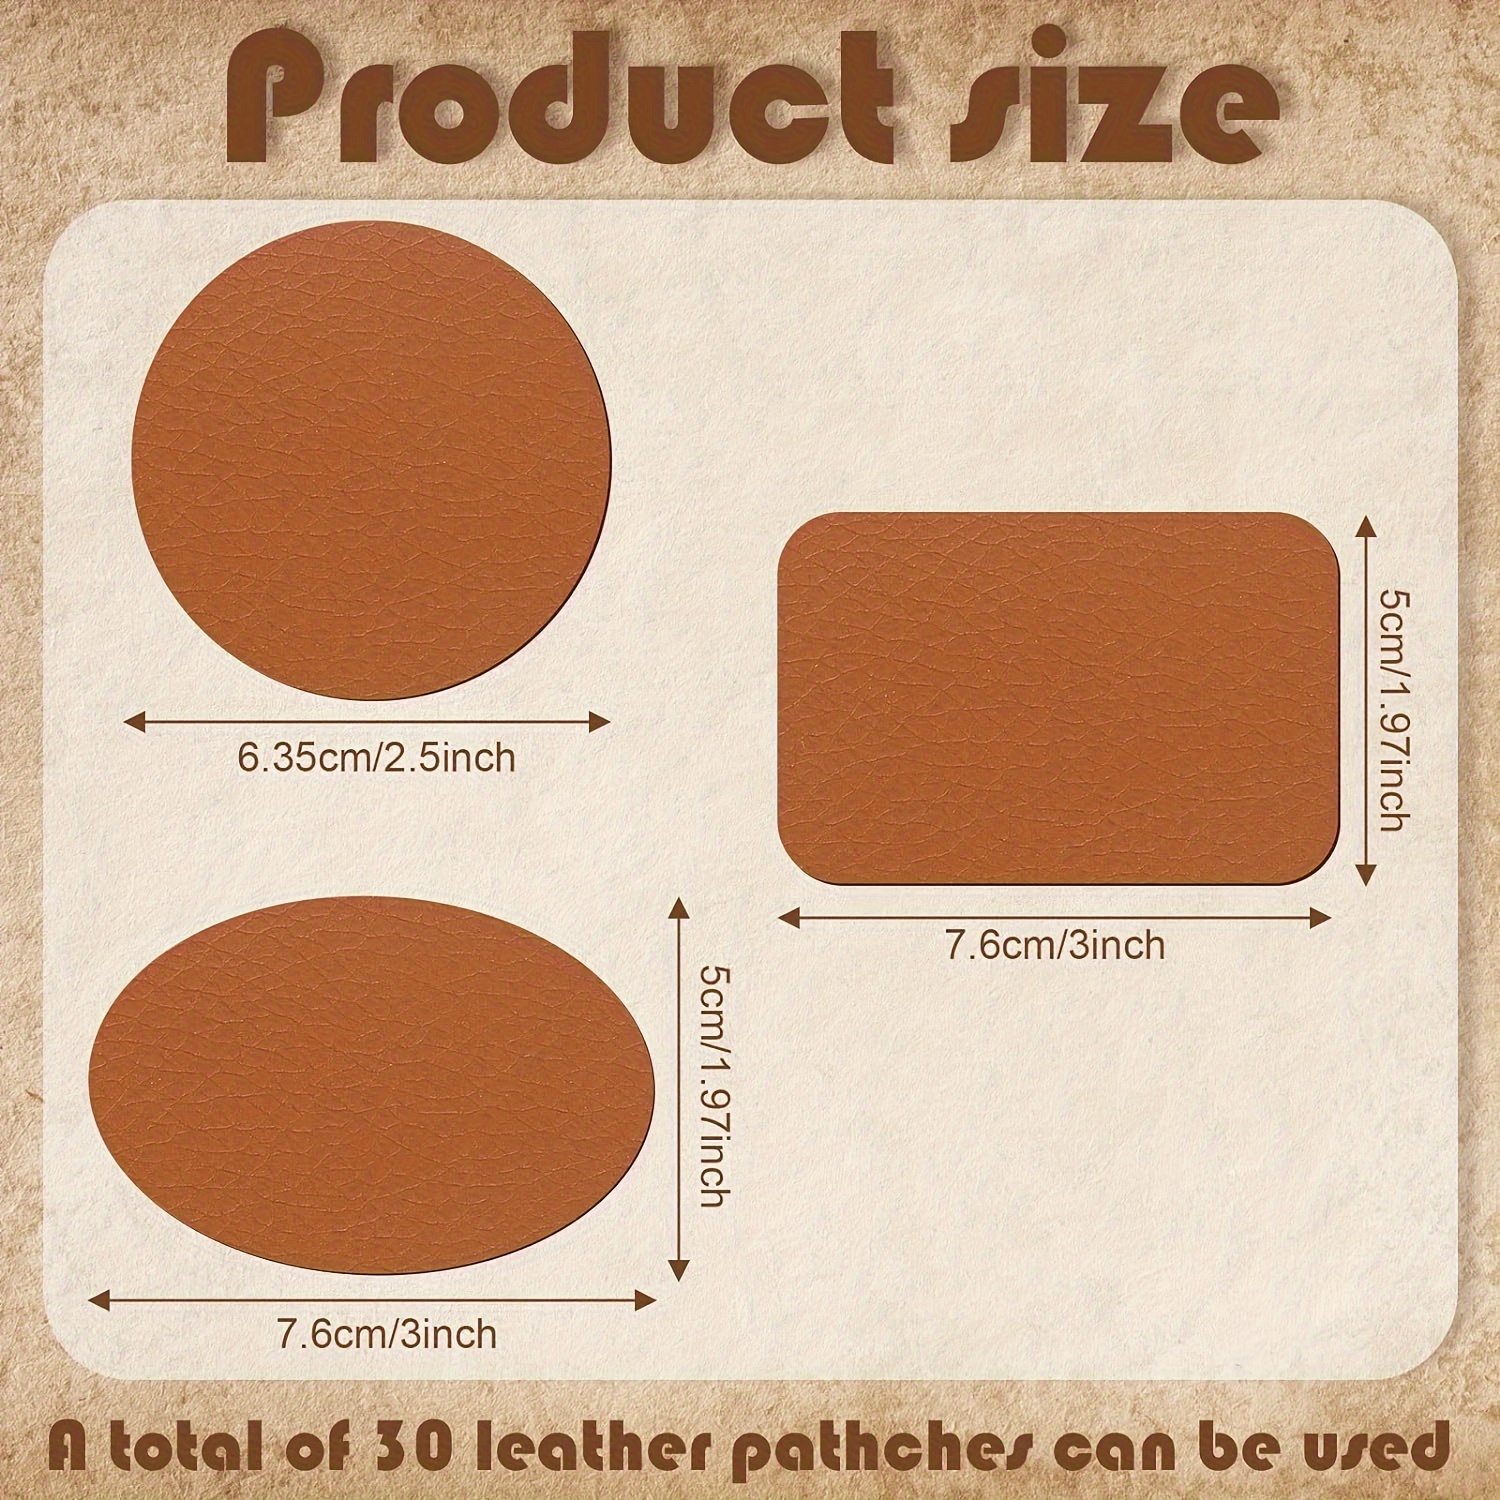 20 Pcs Rectangle Leatherette Hat Patches with Adhesive, Rustic